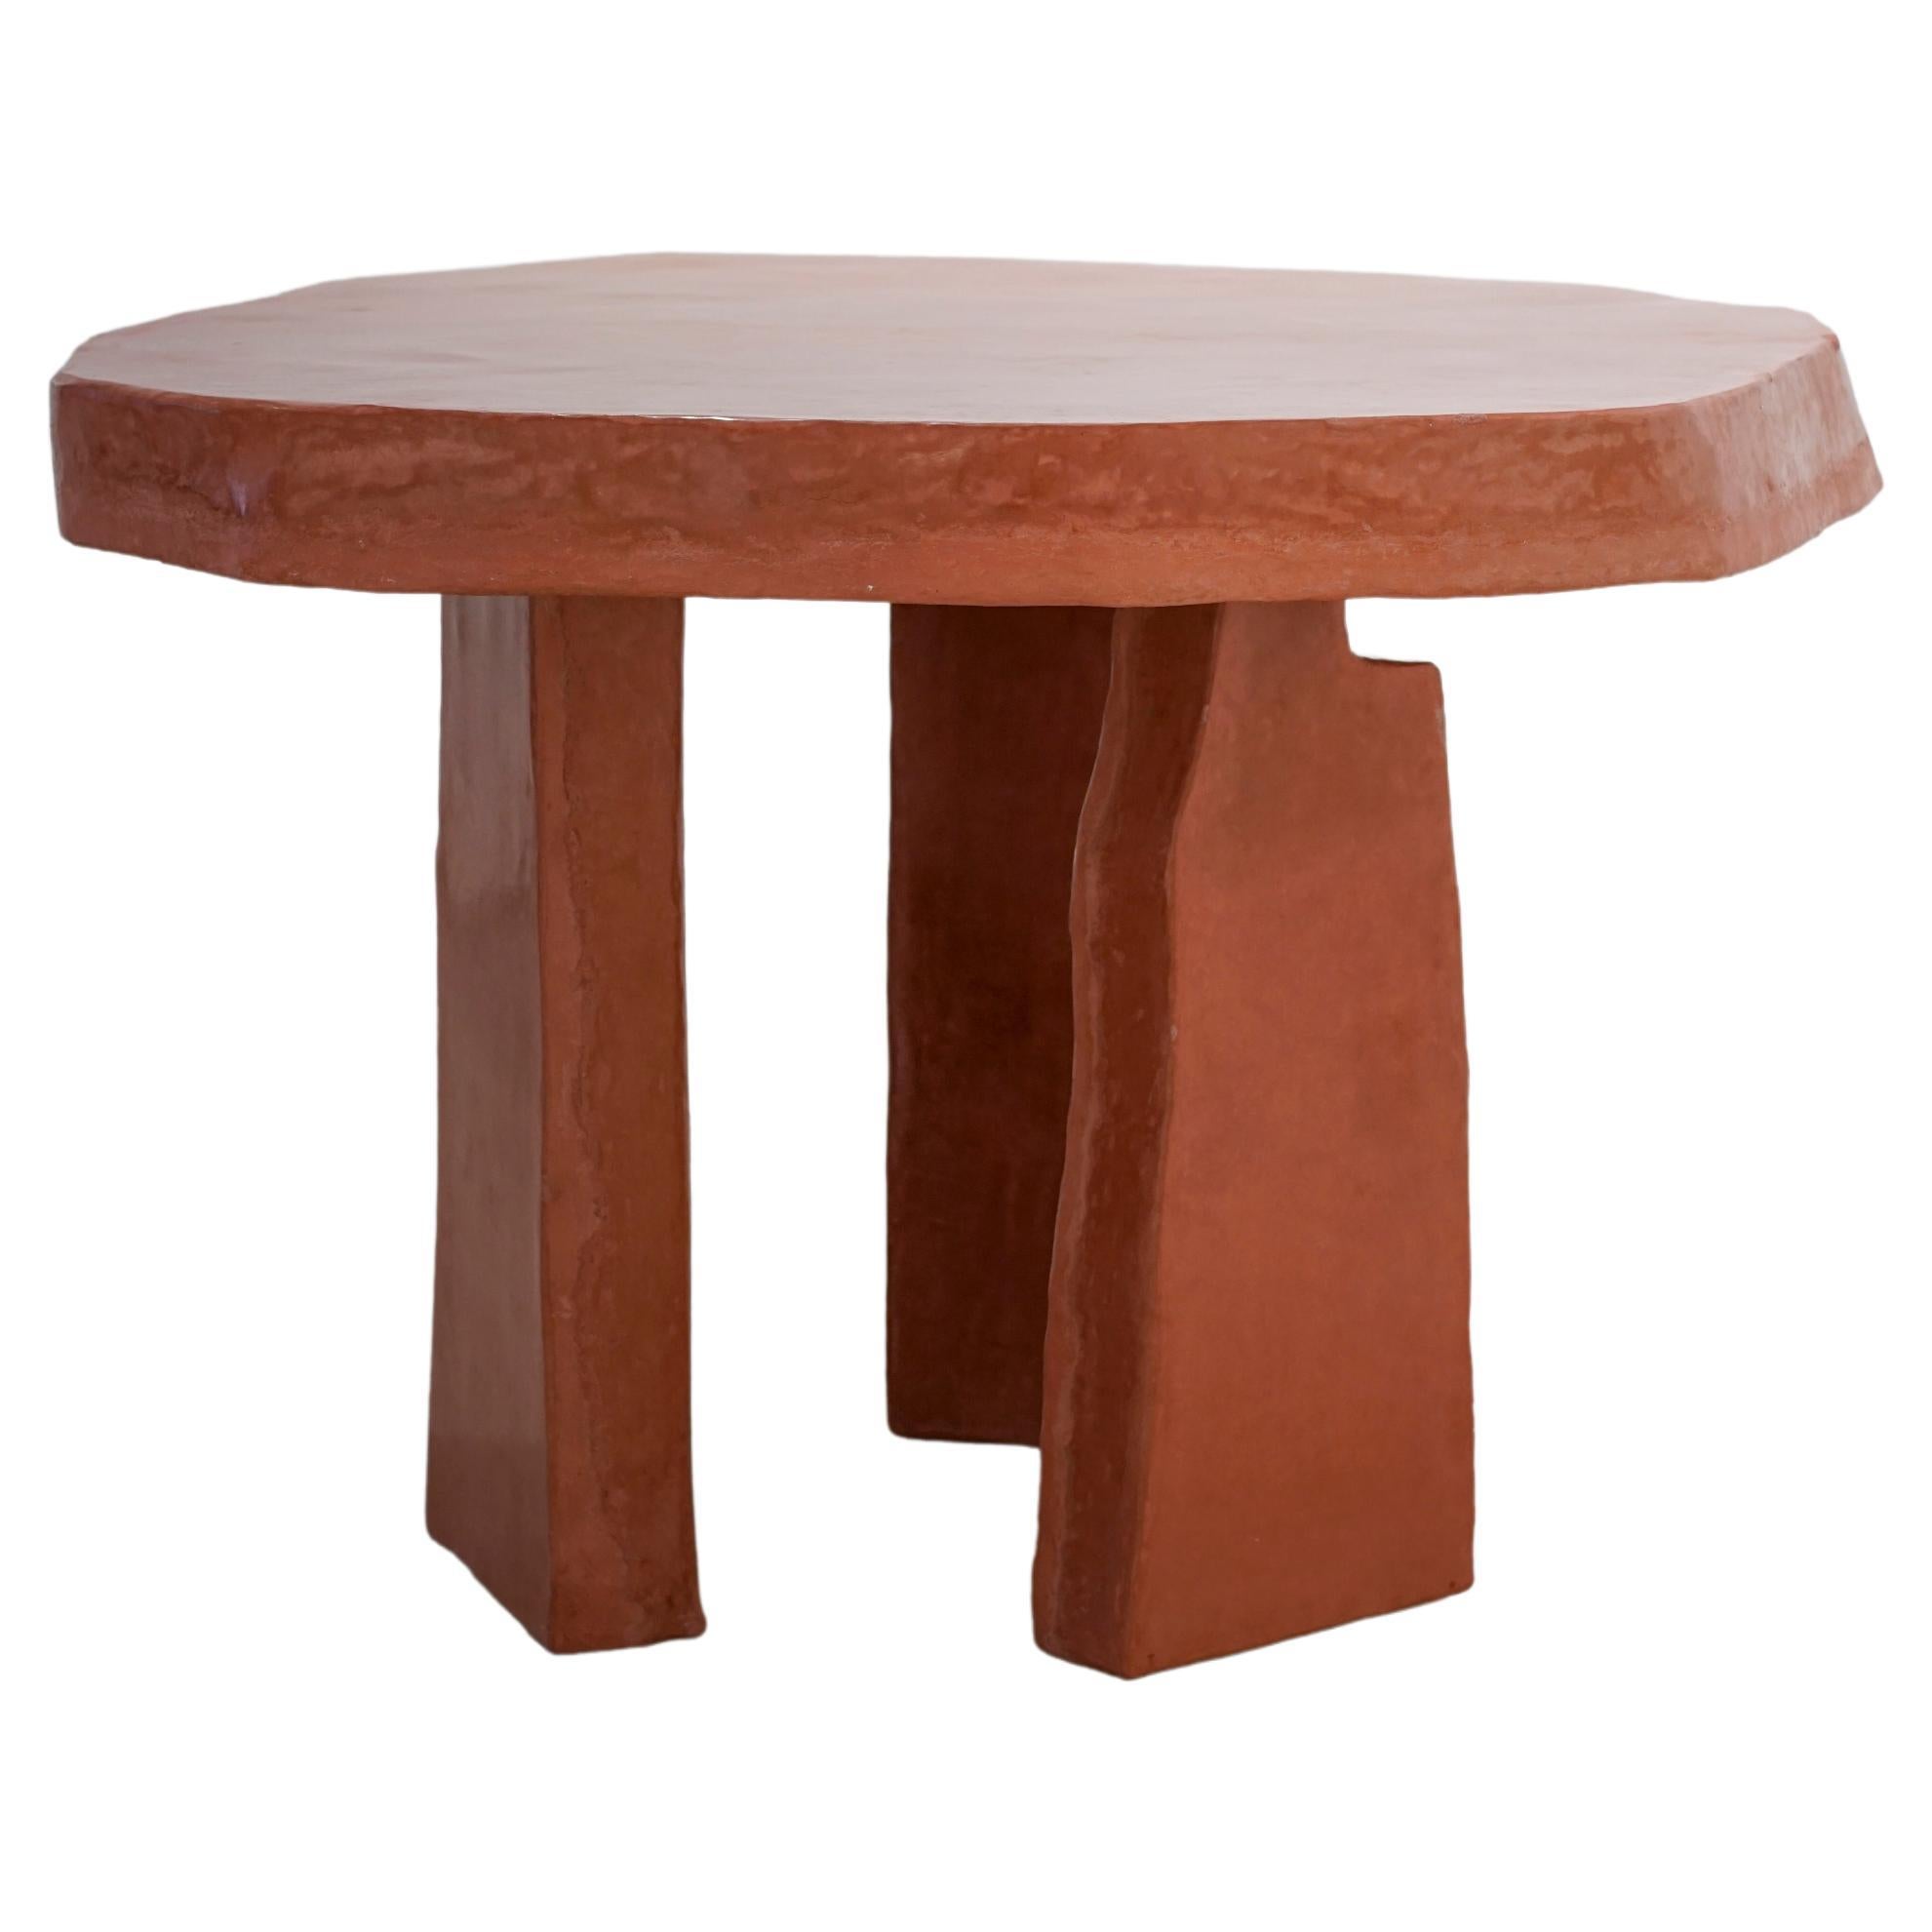 Dolmen Contemporary Table in Lime Plaster and Aerated Concrete 